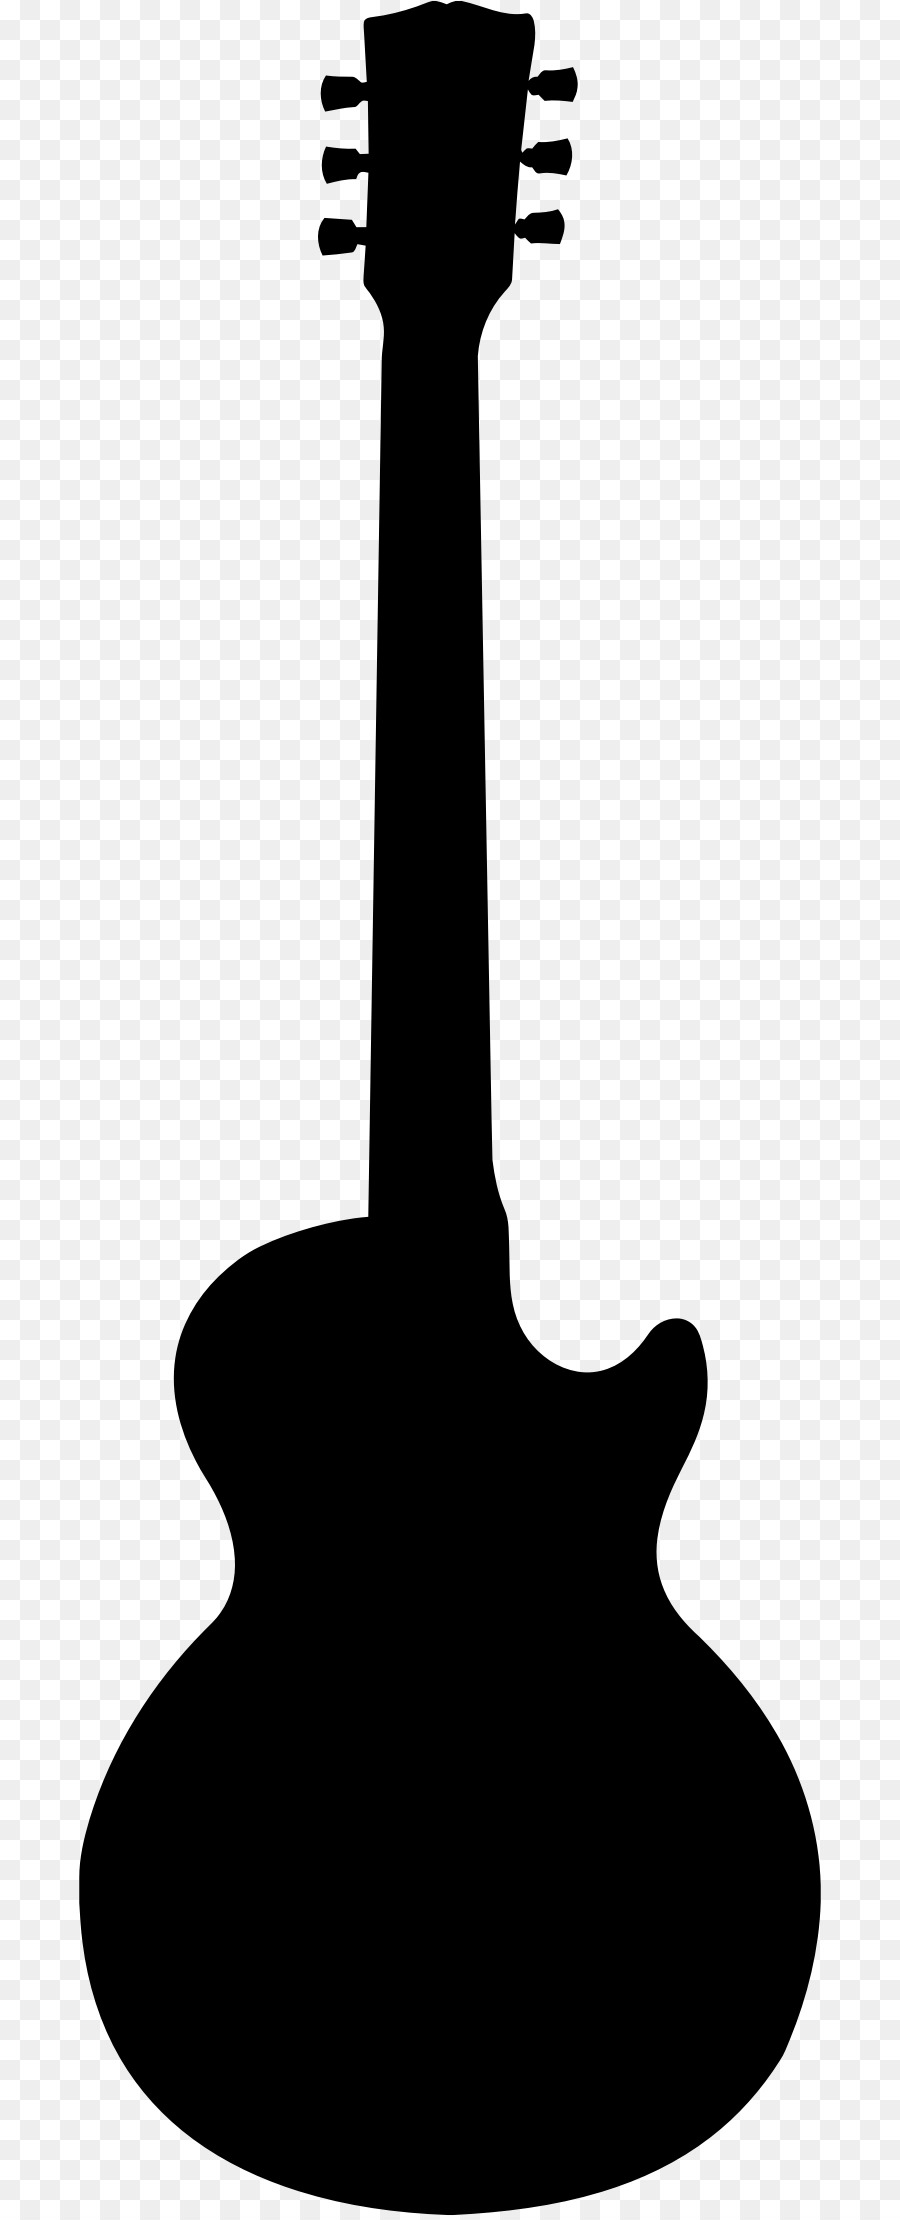 Download Electric Guitar Silhouette Png - Music Instrument